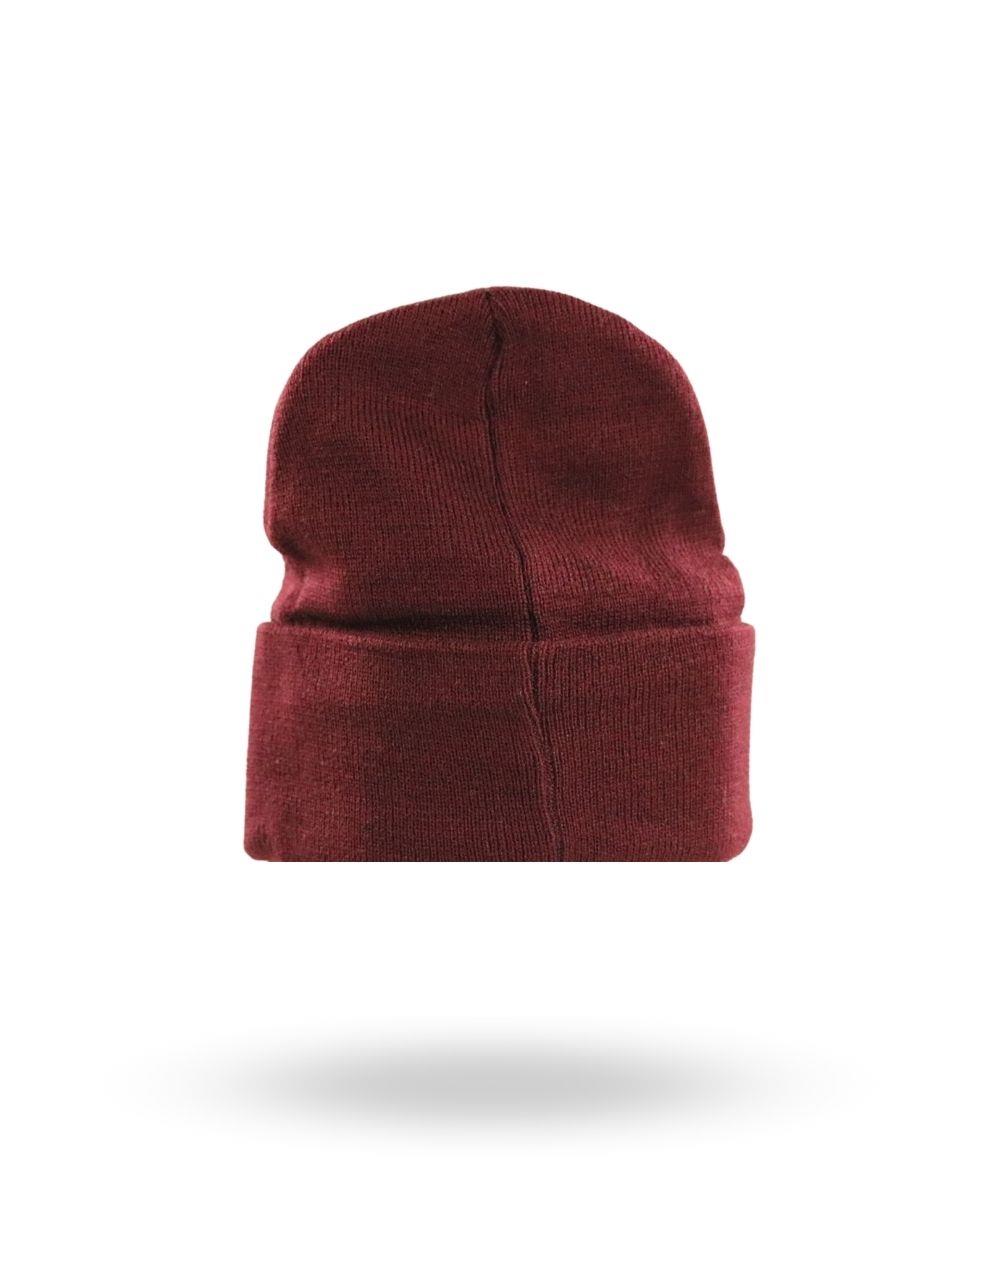 Basic Folded Daily Beret Claret Red - STREETMODE ™